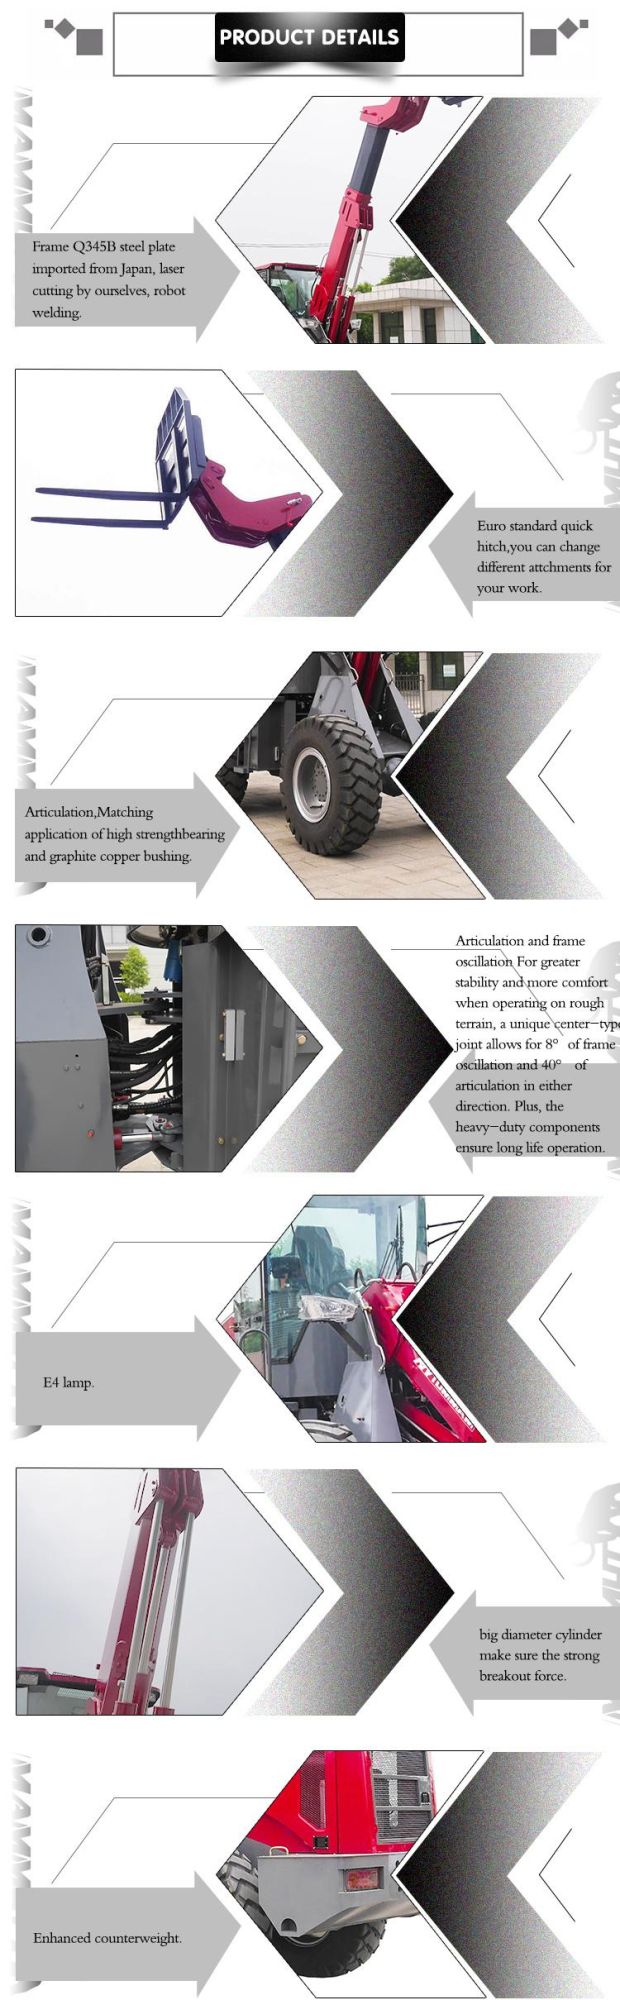 3.5 Ton Chinese Telescopic Boom Loader with Attachments.